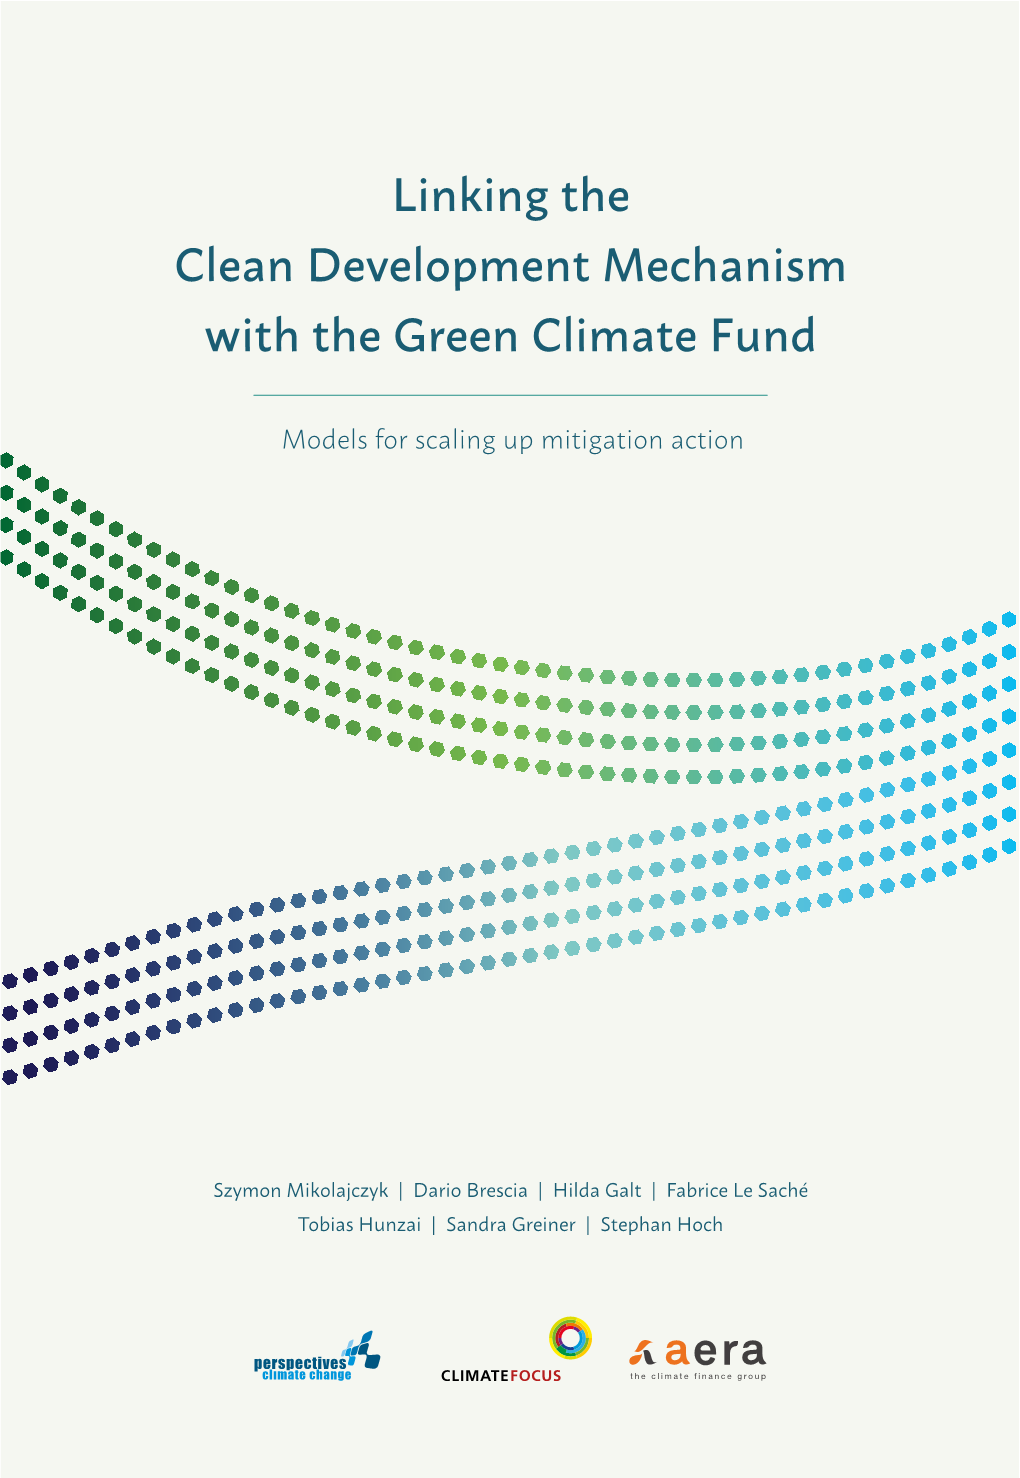 Linking the Clean Development Mechanism with the Green Climate Fund